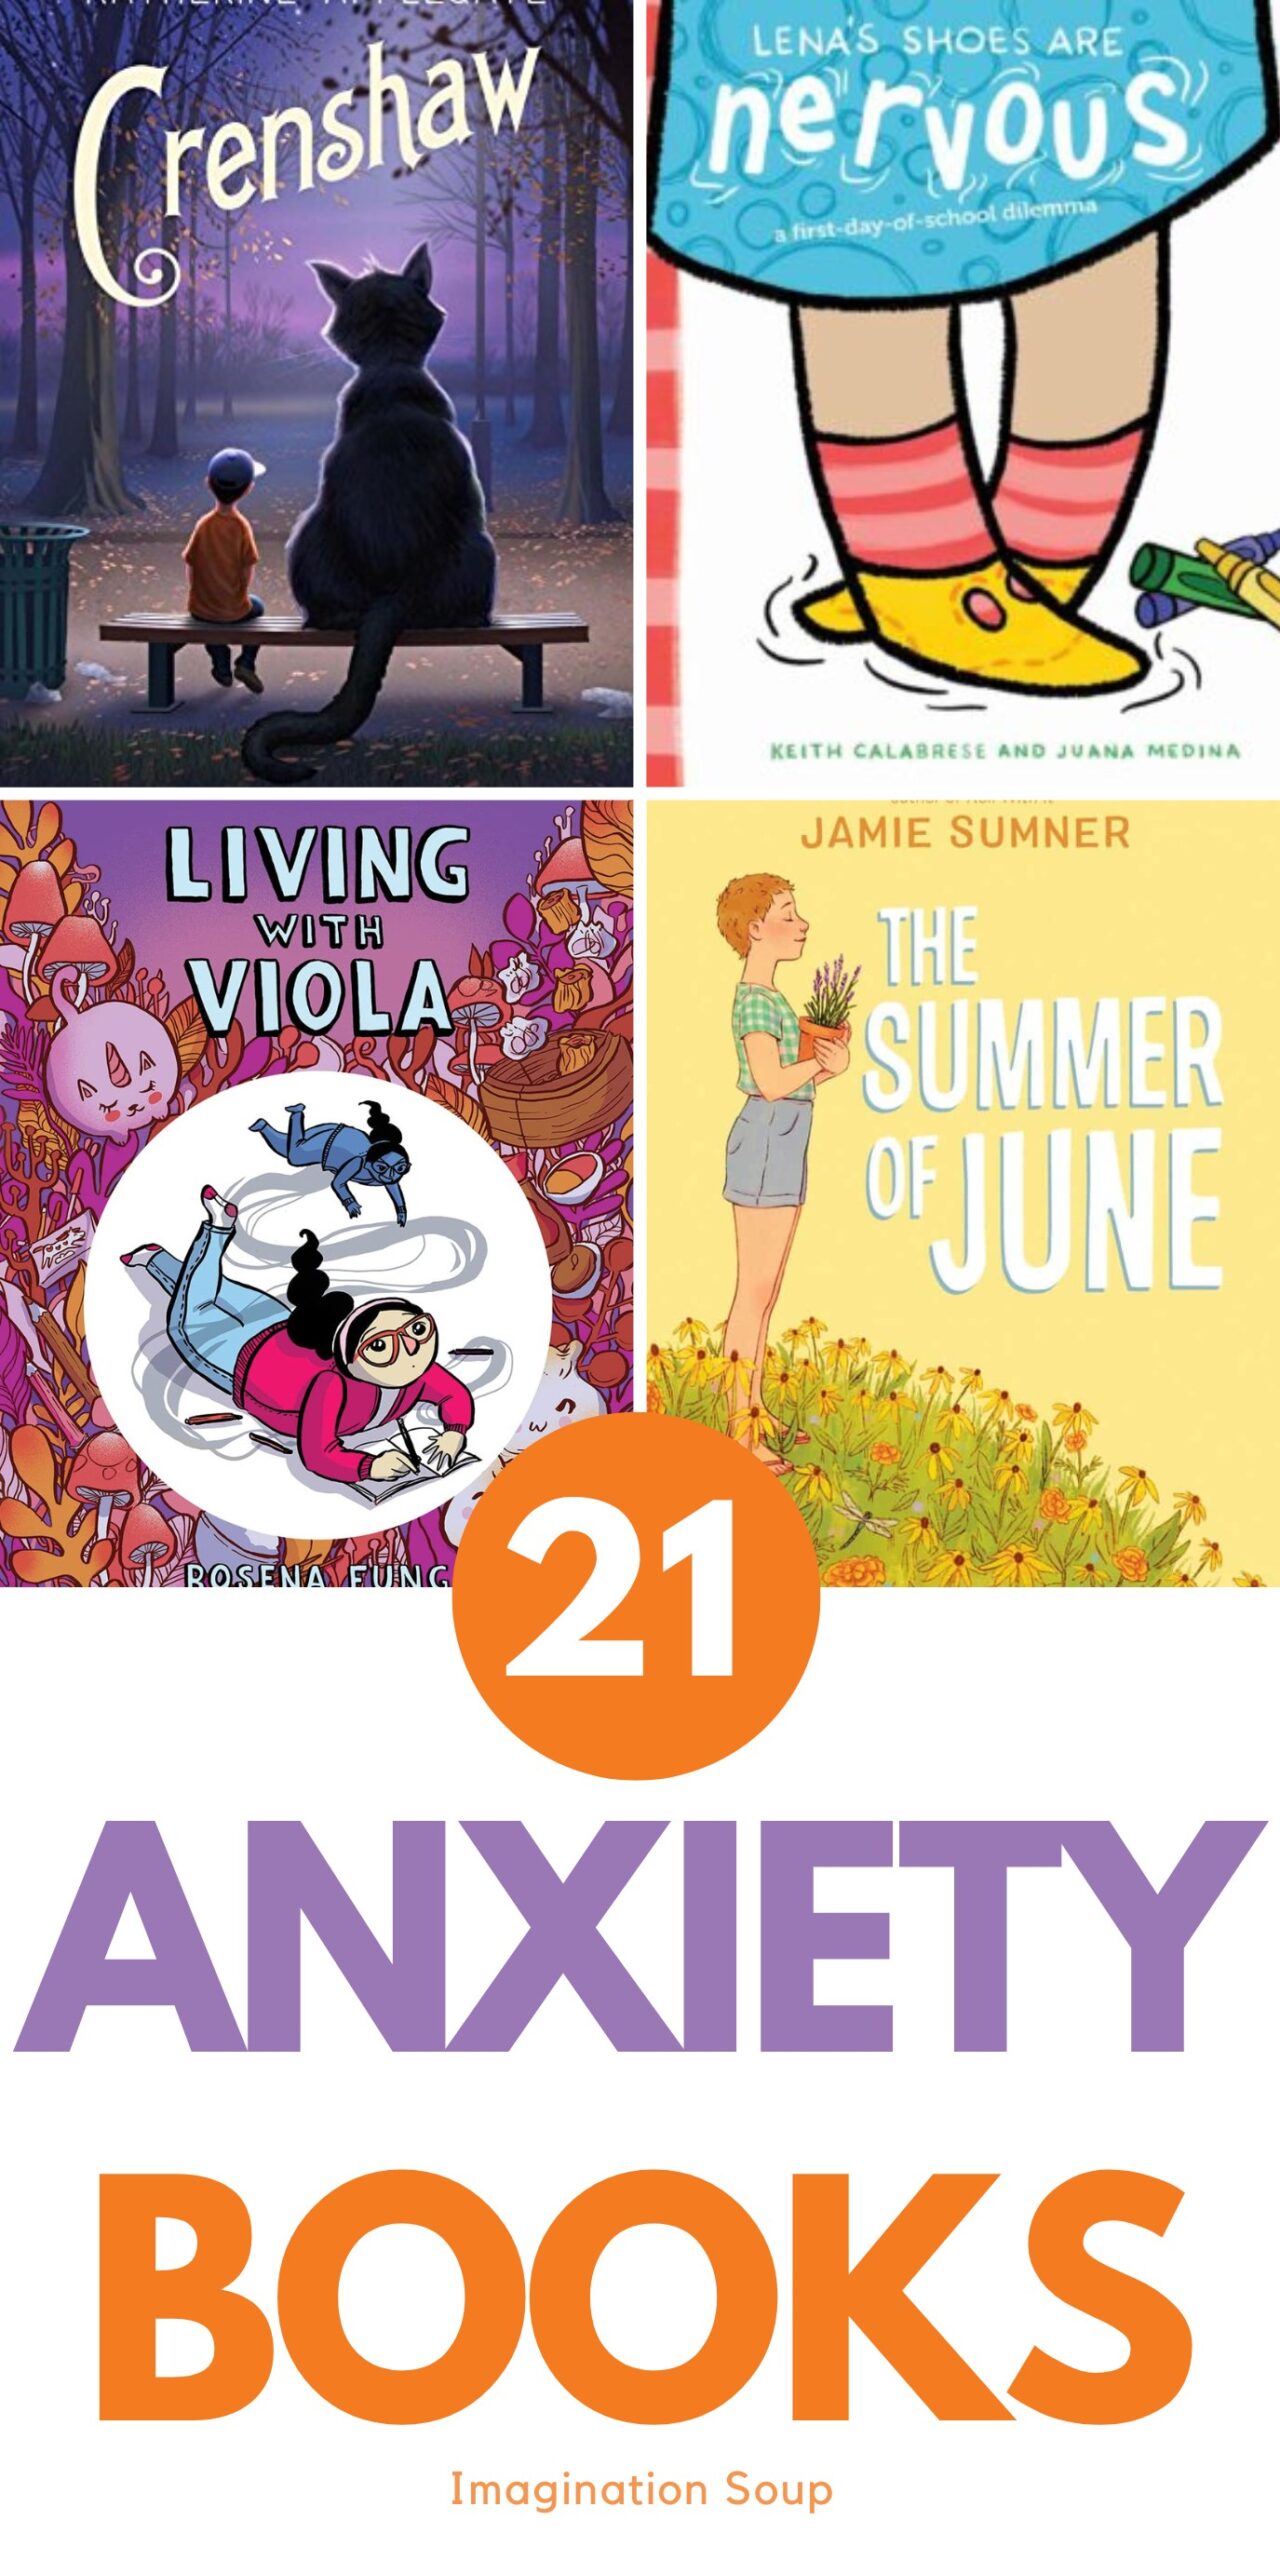 Children's anxiety books may help your child feel less alone--and provide strategies and empathy. 